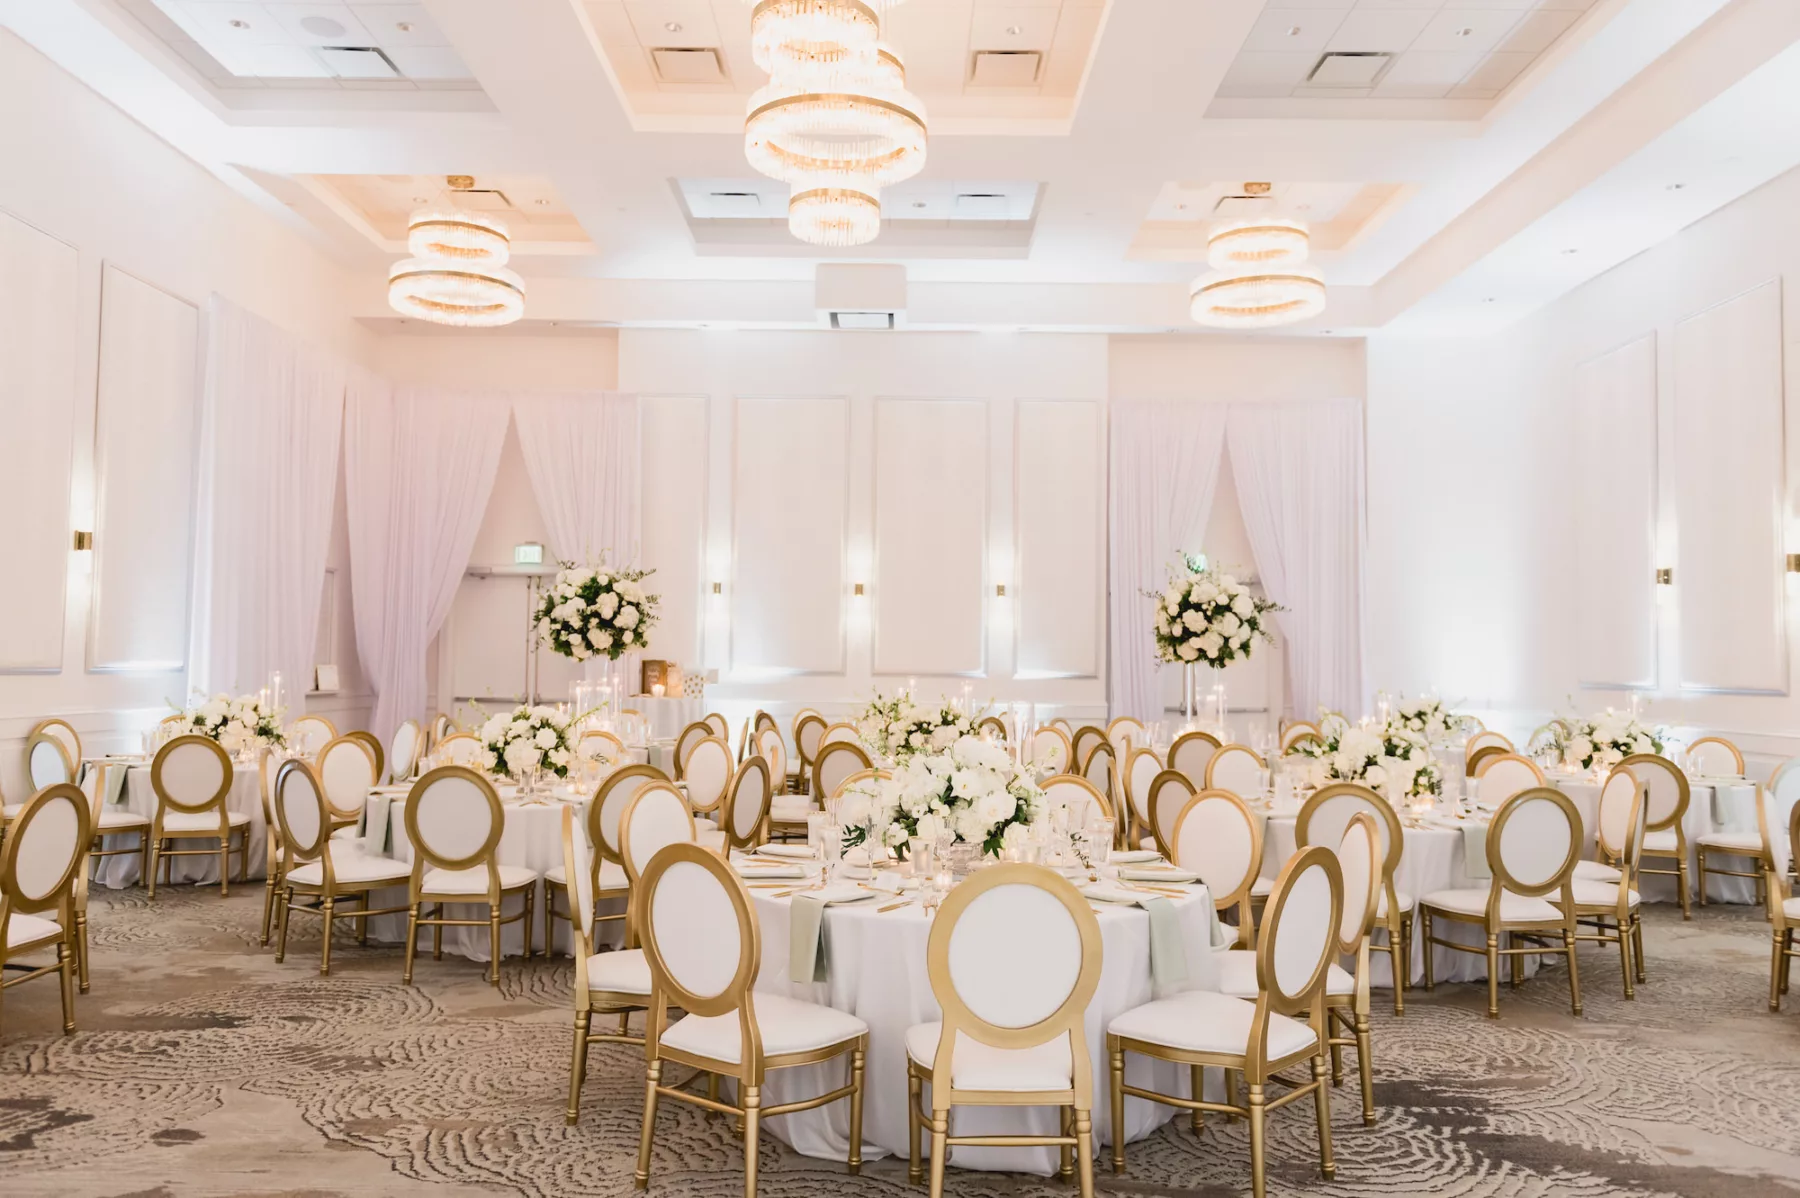 Classic White and Gold Spring Ballroom Wedding Reception Inspiration | Tampa Bay Event Venue The Karol Hotel | Clearwater Kate Ryan Event Rentals | Planner Parties A La Carte | Florist Bruce Wayne Florals